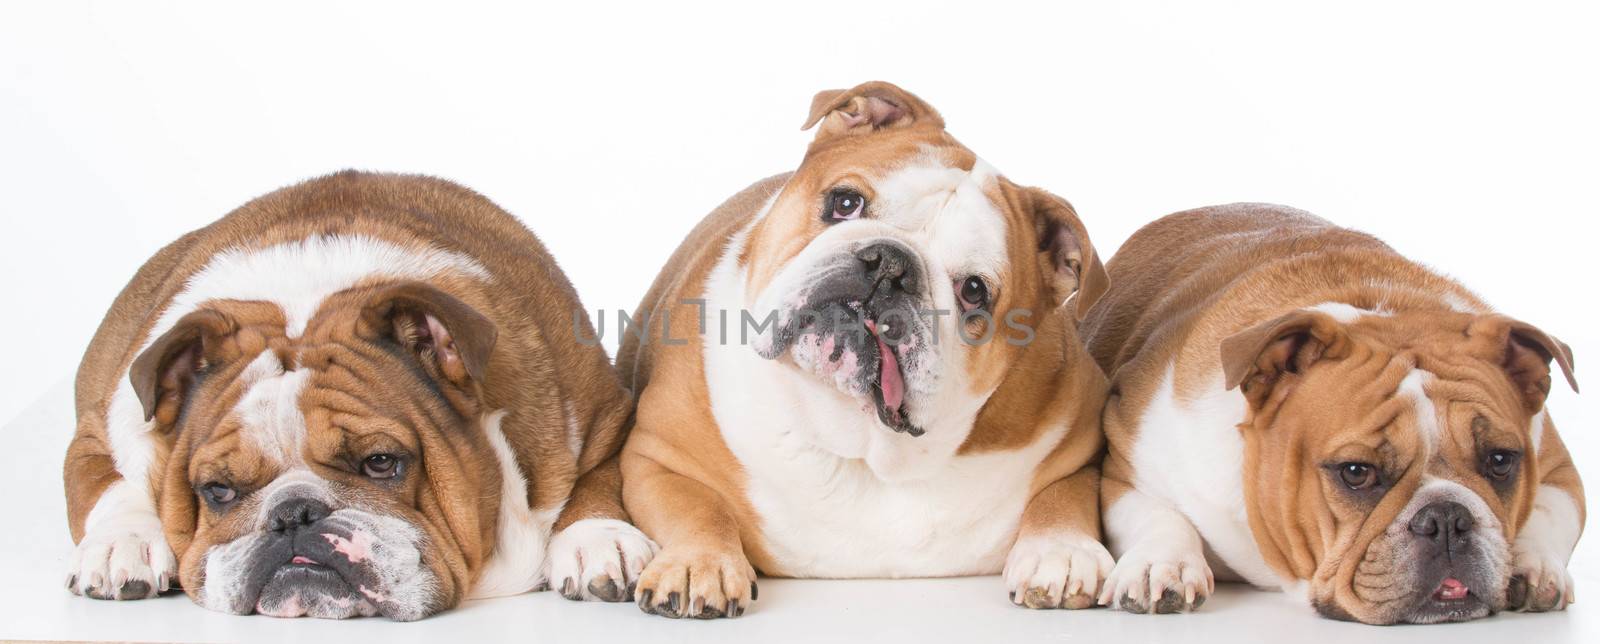 three bulldogs laying down on white background